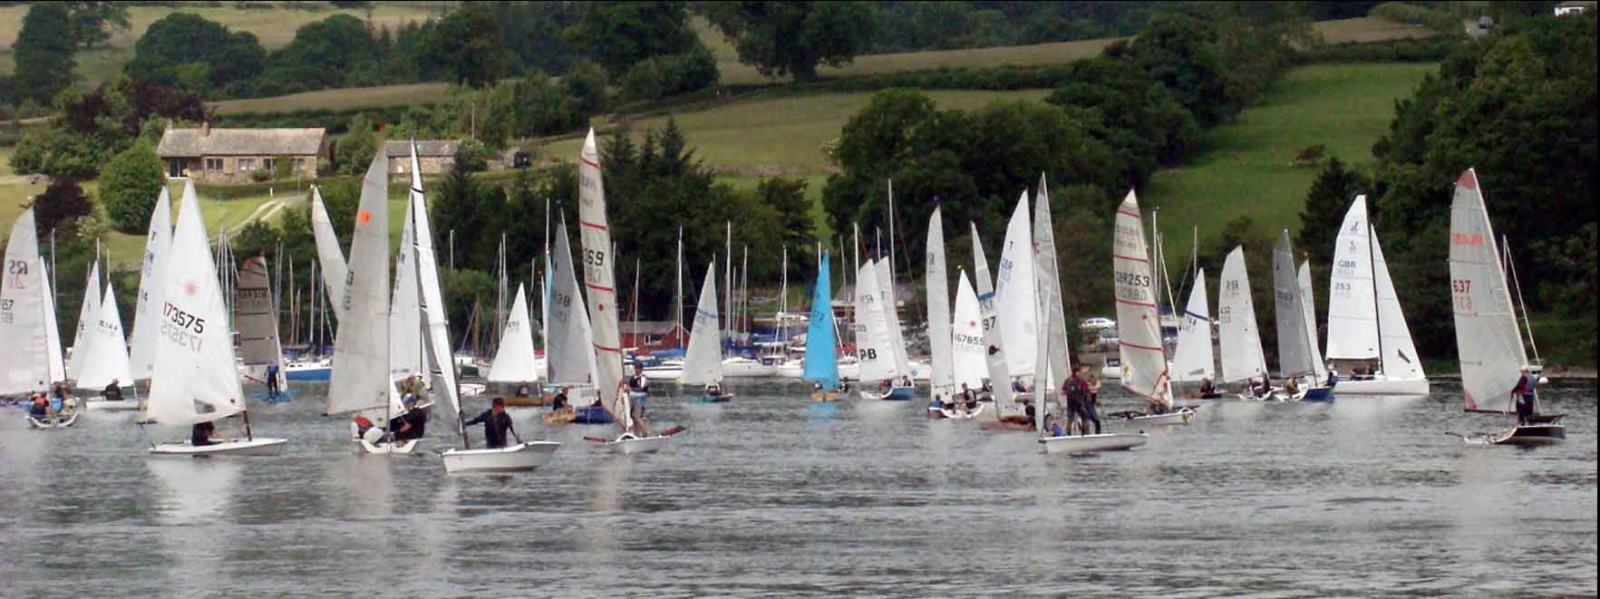 Start of the Birkett Sailing Race and advice on sunglasses for sailing